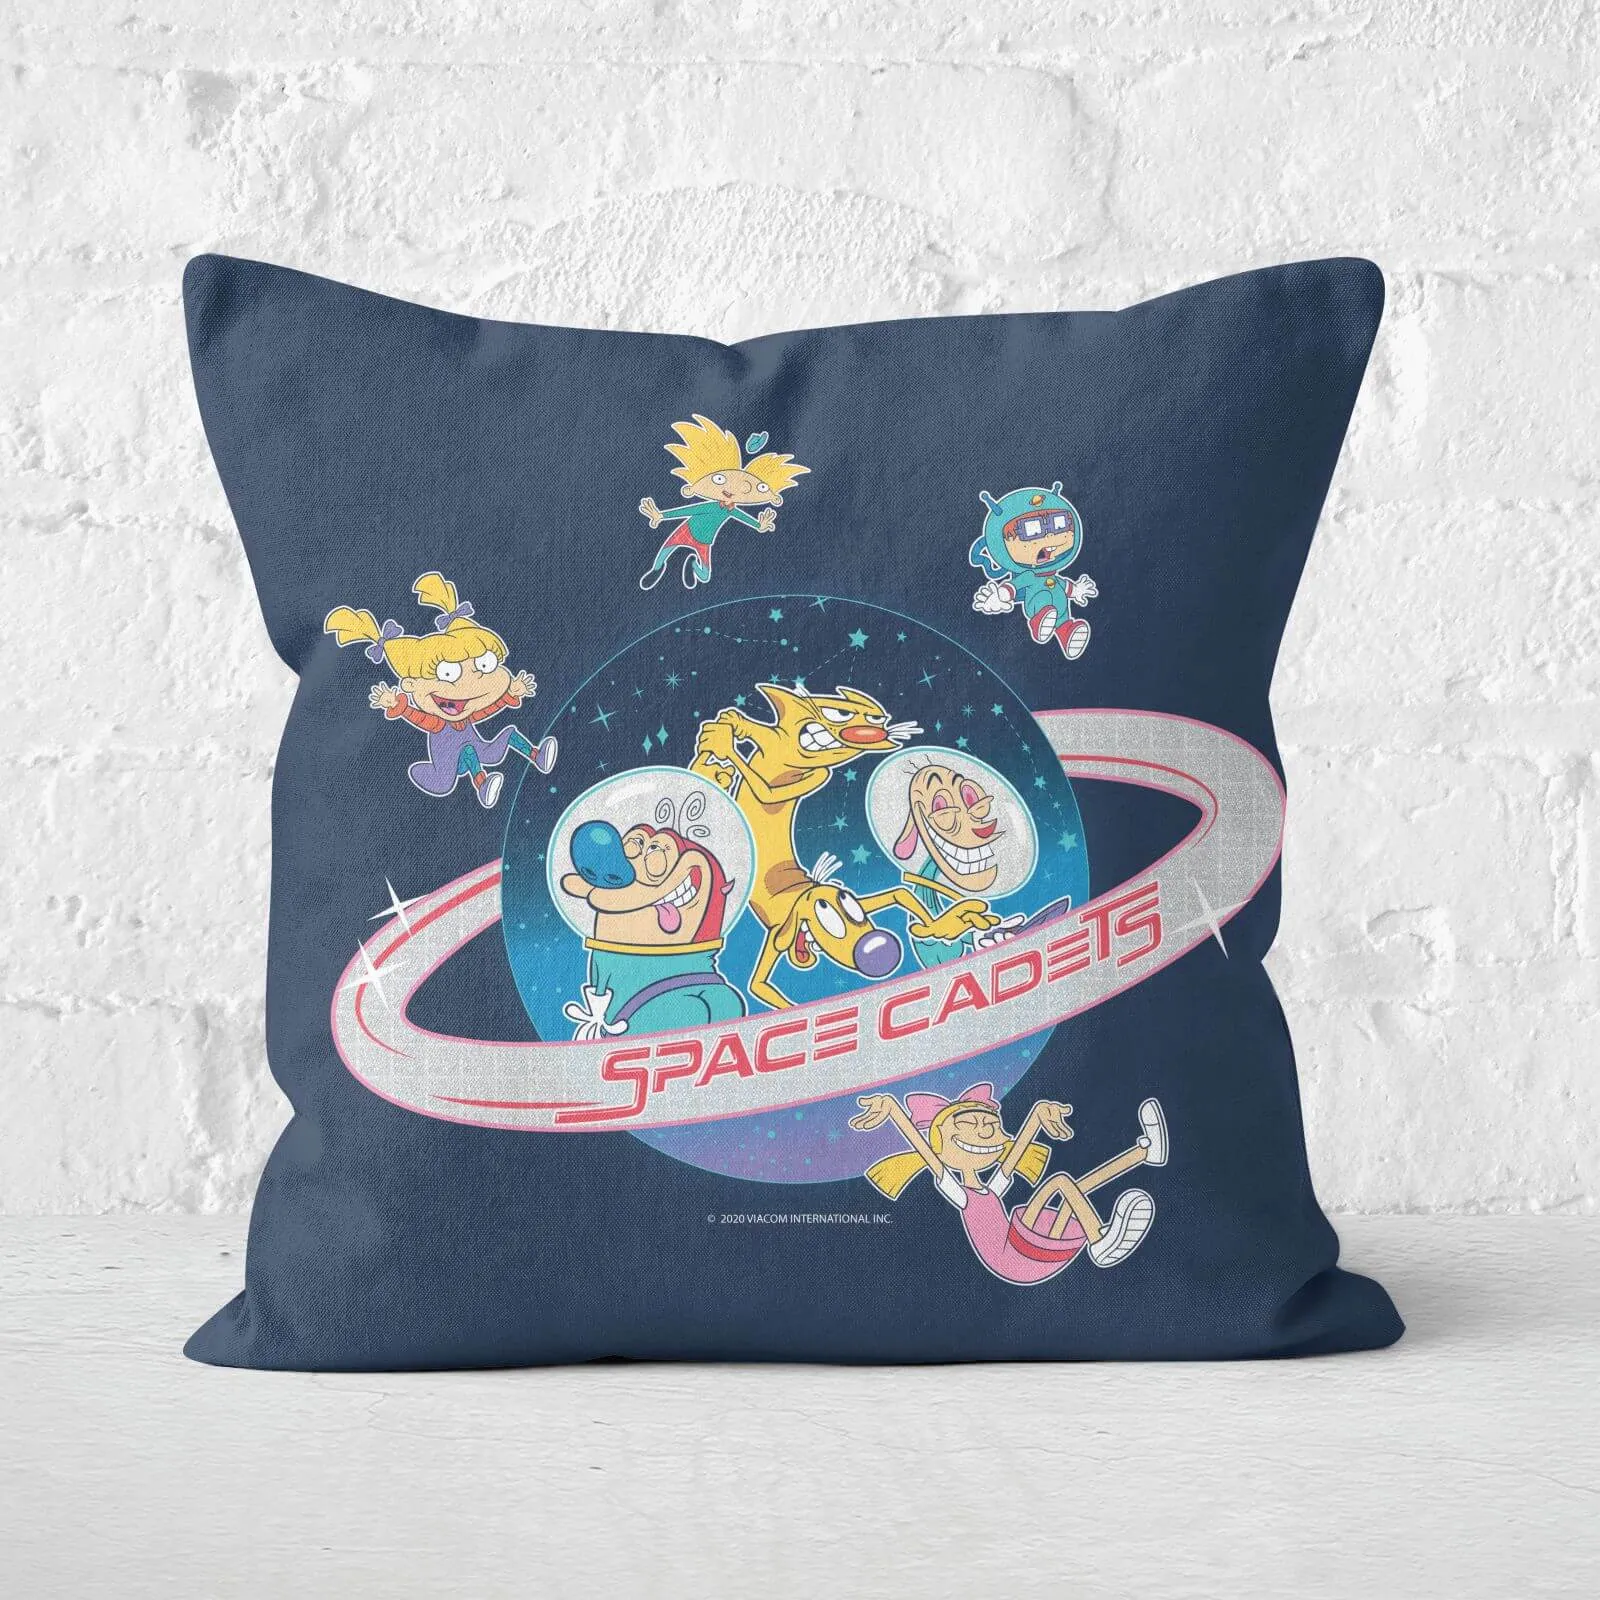 Cuscino quadrato Nickelodeon Space Cadets - 60x60cm - Soft Touch